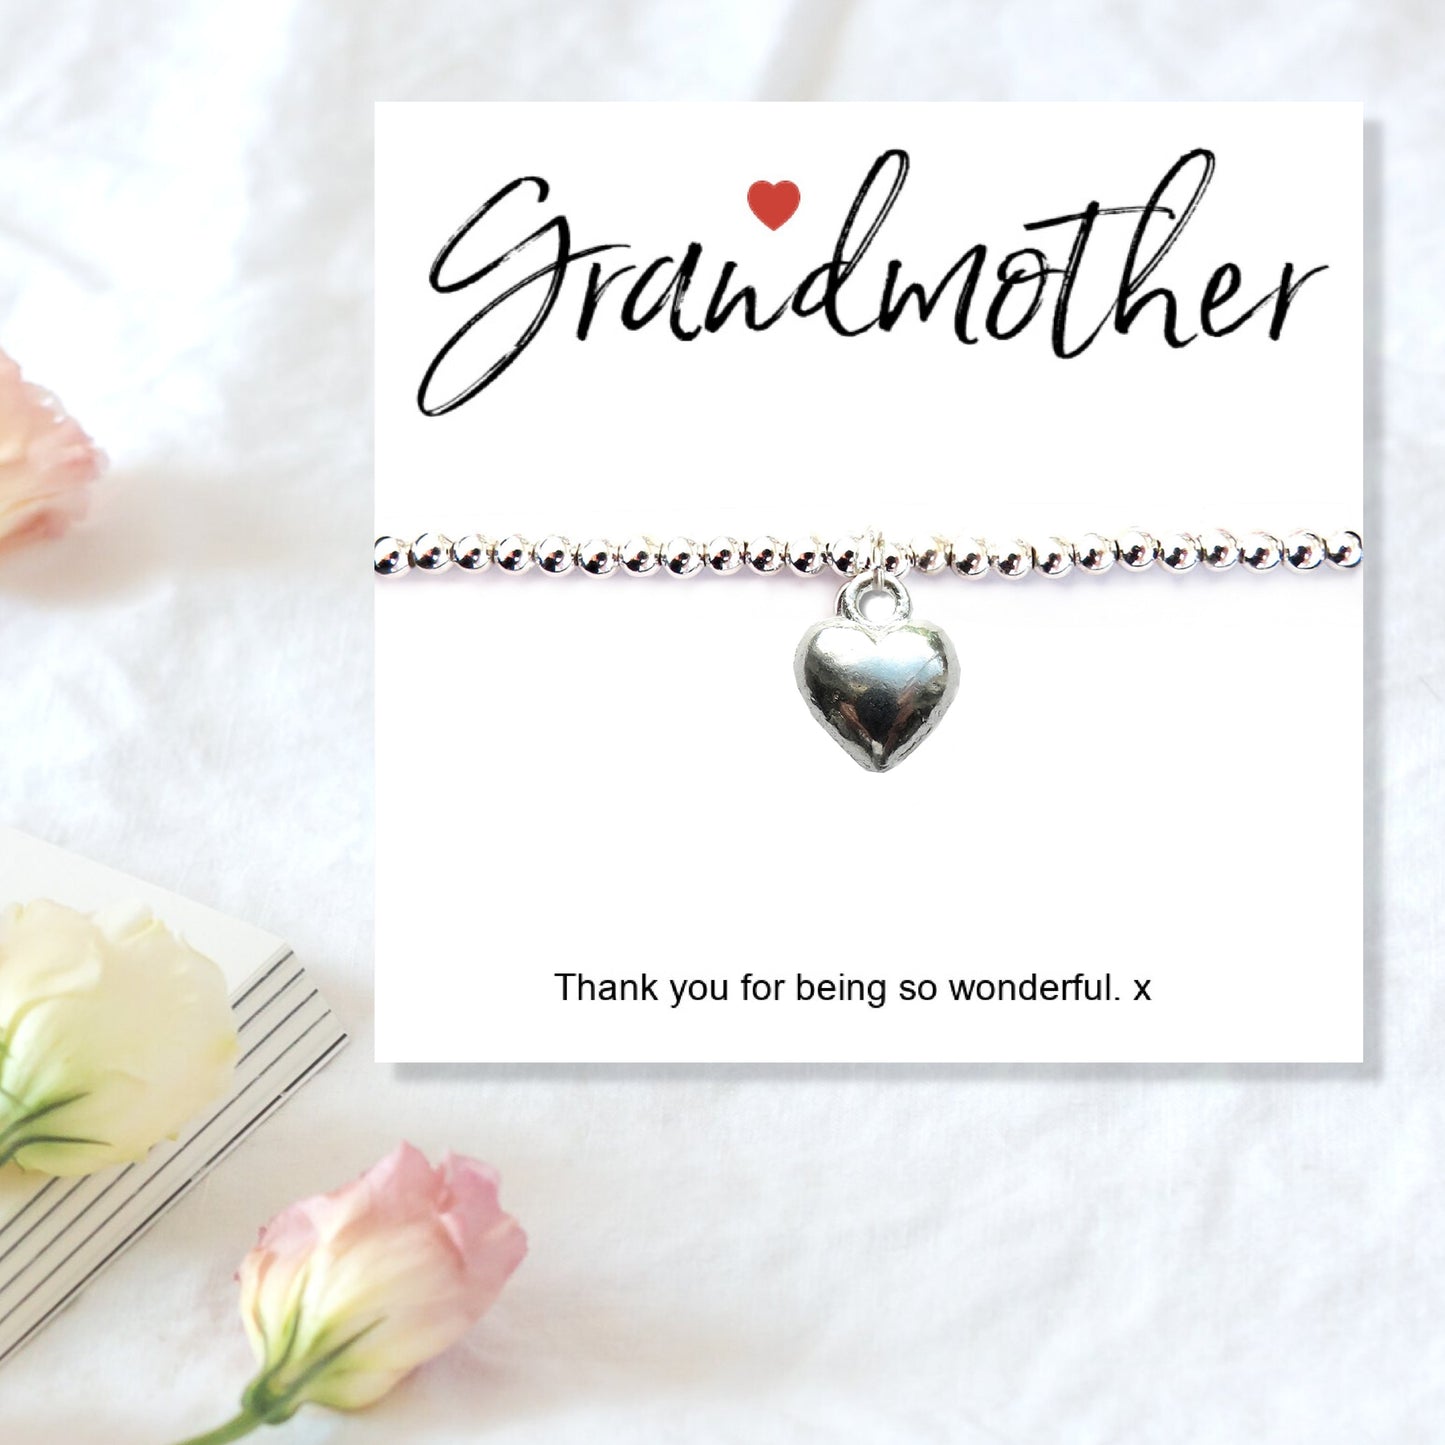 Grandmother Message Gift Card with Heart Charm Bracelet